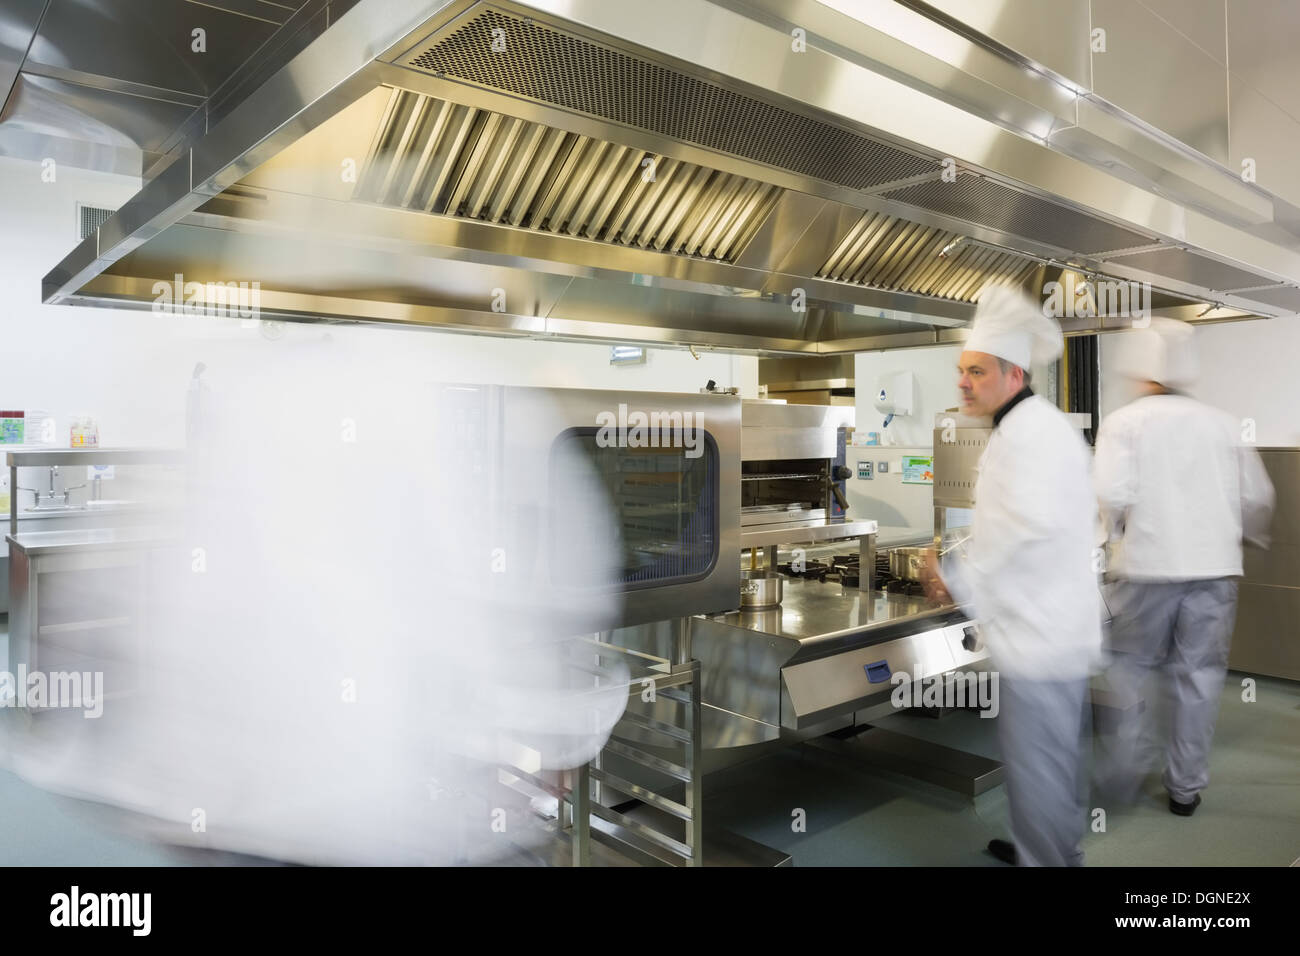 Team of chefs working in a kitchen Stock Photo